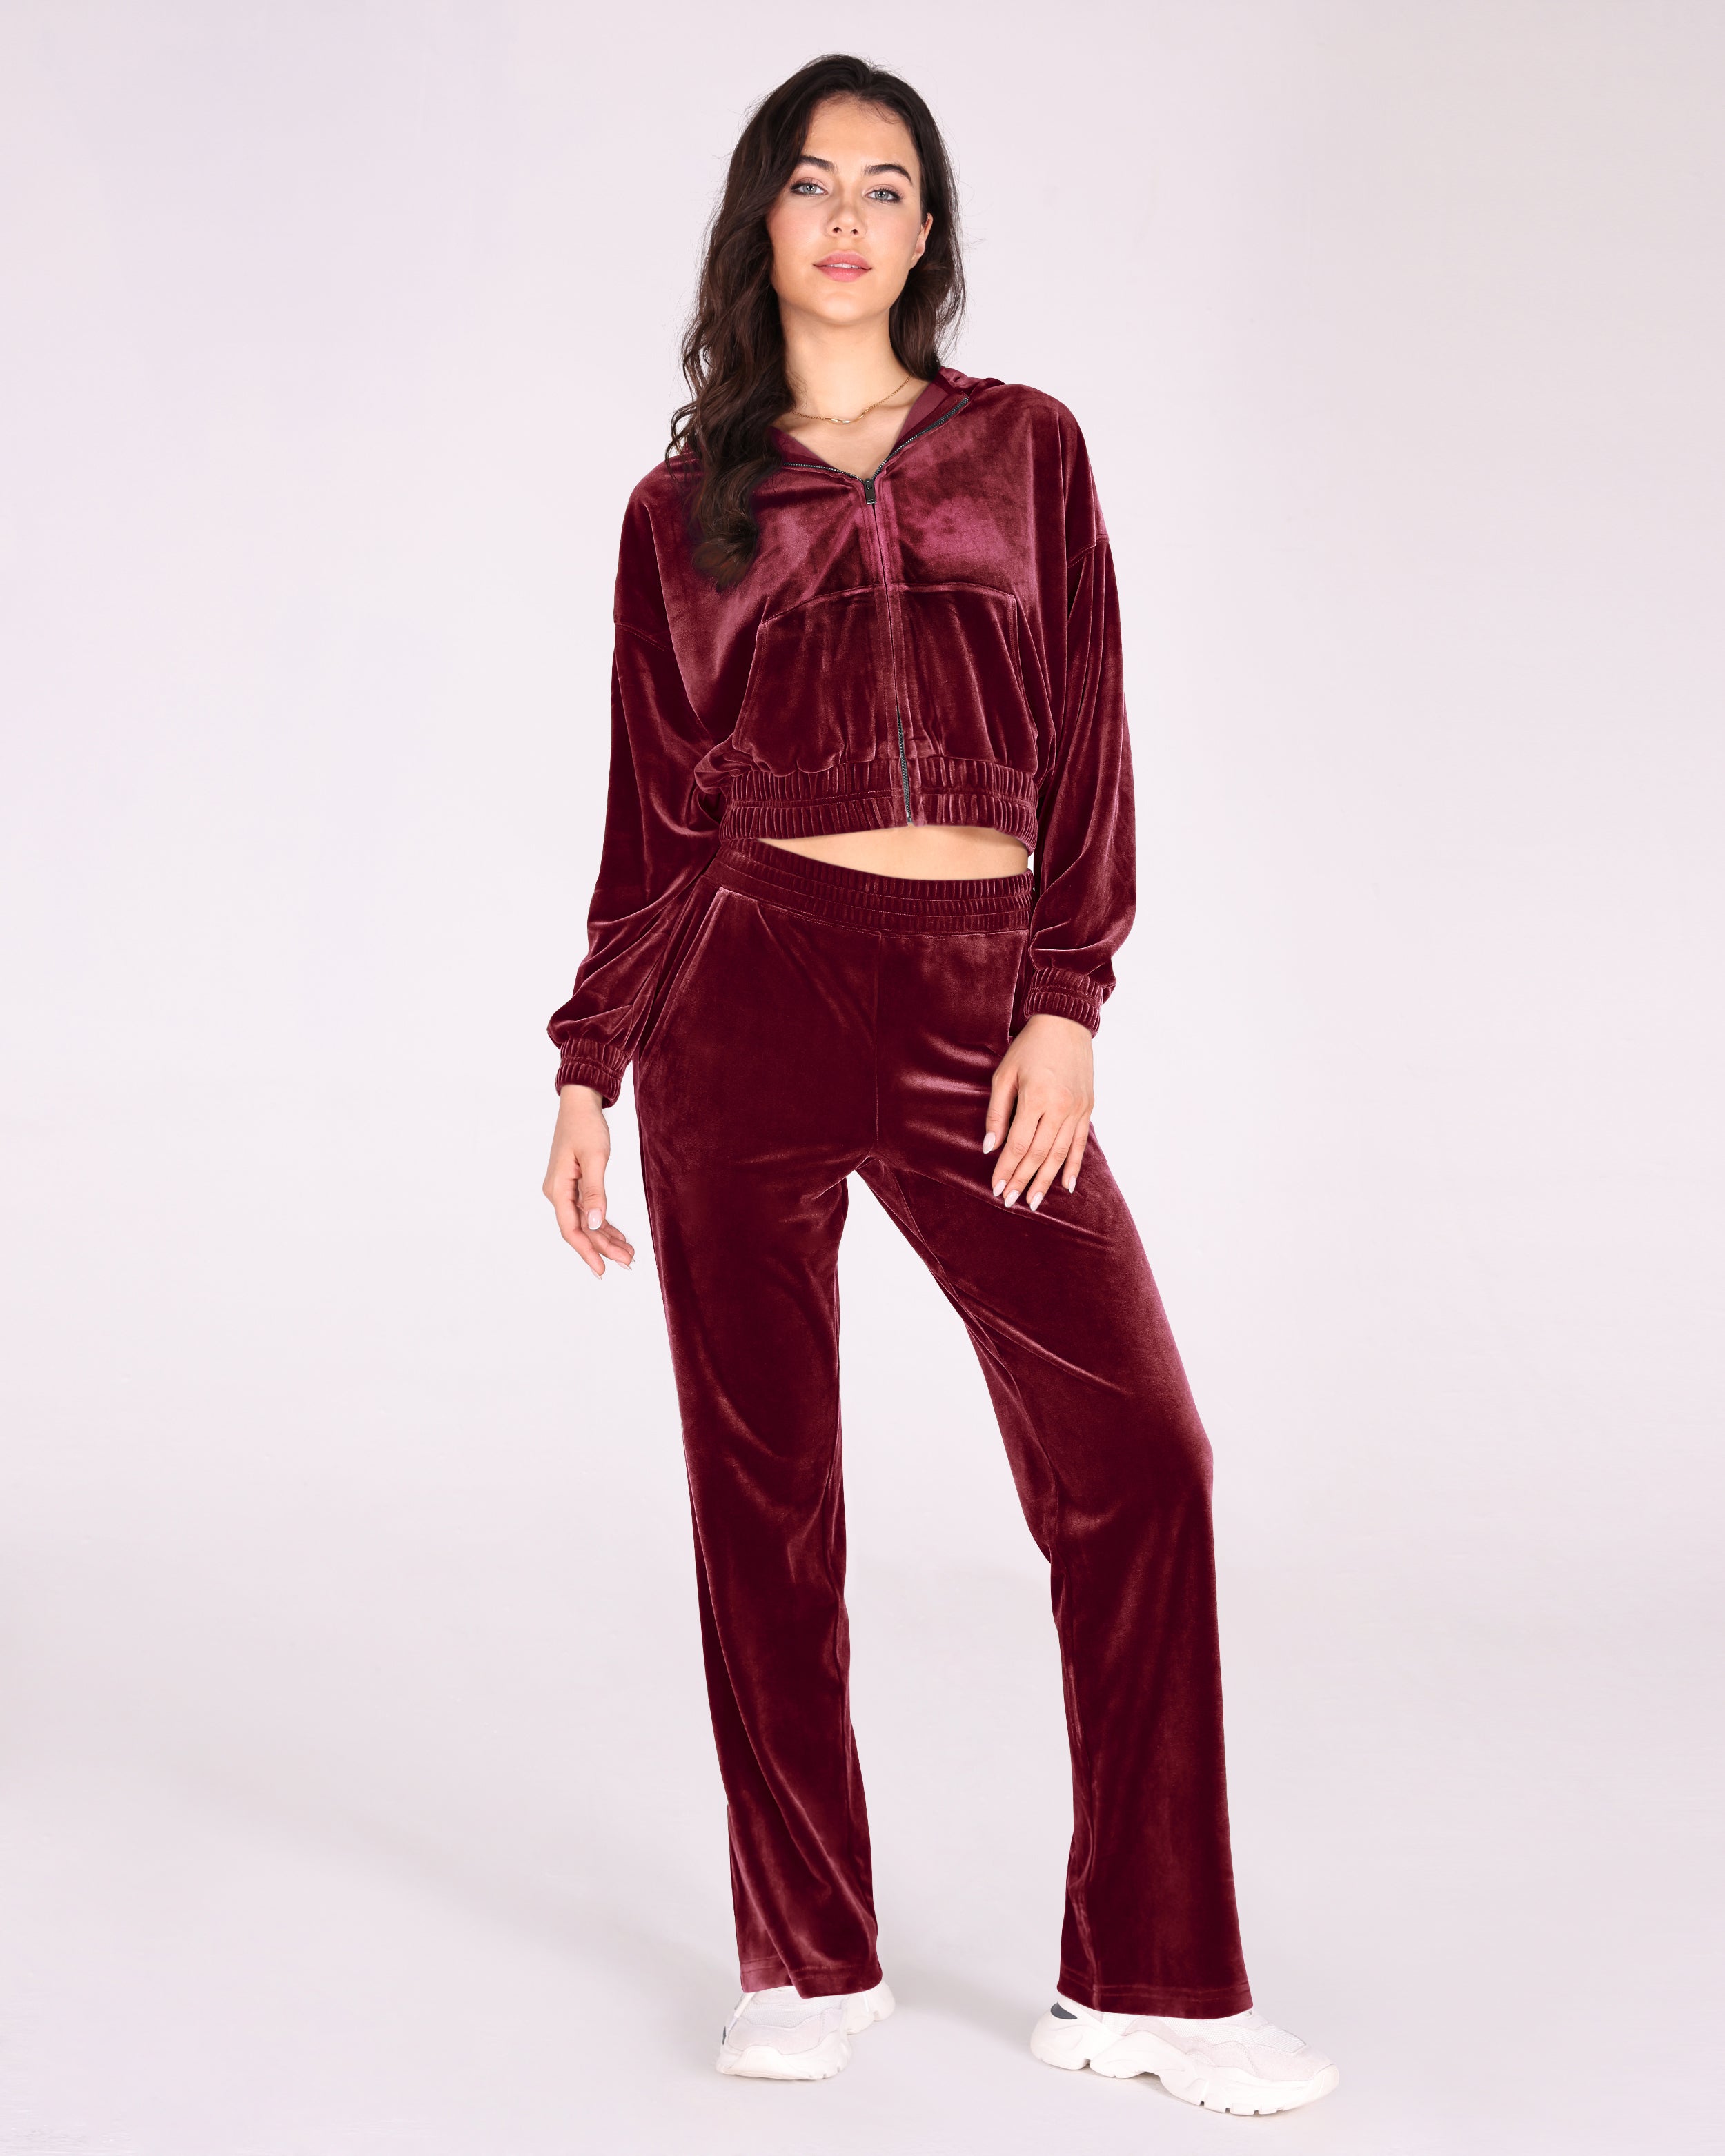 Velour Tracksuit 2 Piece Outfits Long Sleeve Cropped Zip Hooded Sweatshirt & Track Pants Set Wine - ododos